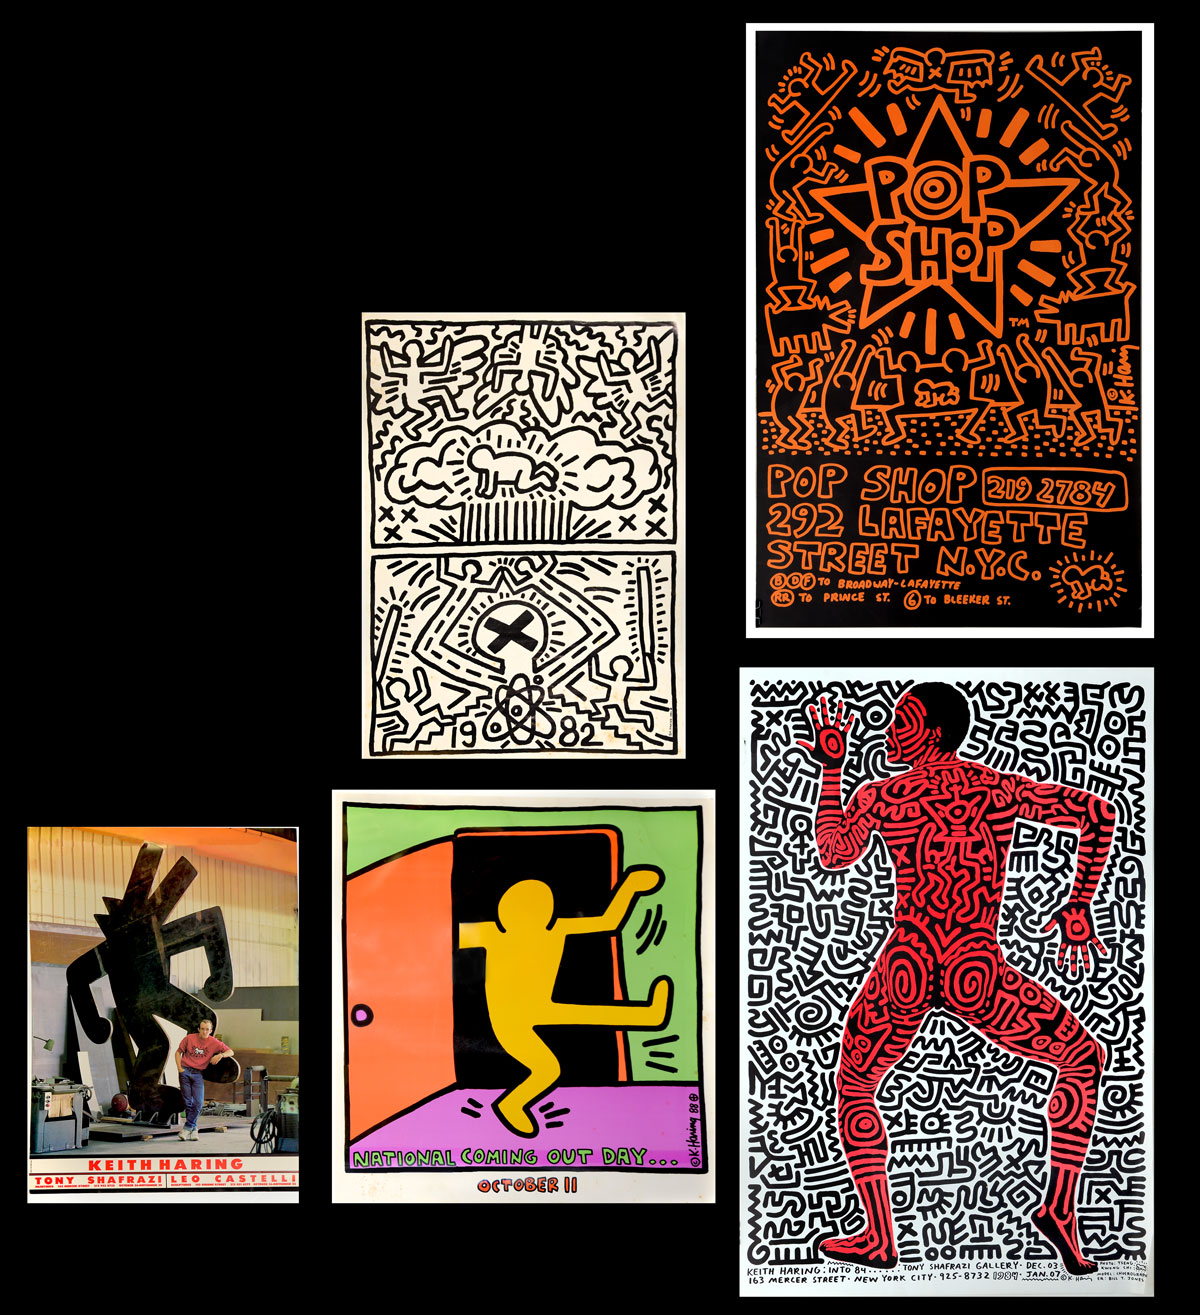 FIVE PIECE KEITH HARING POSTER 36f2e0